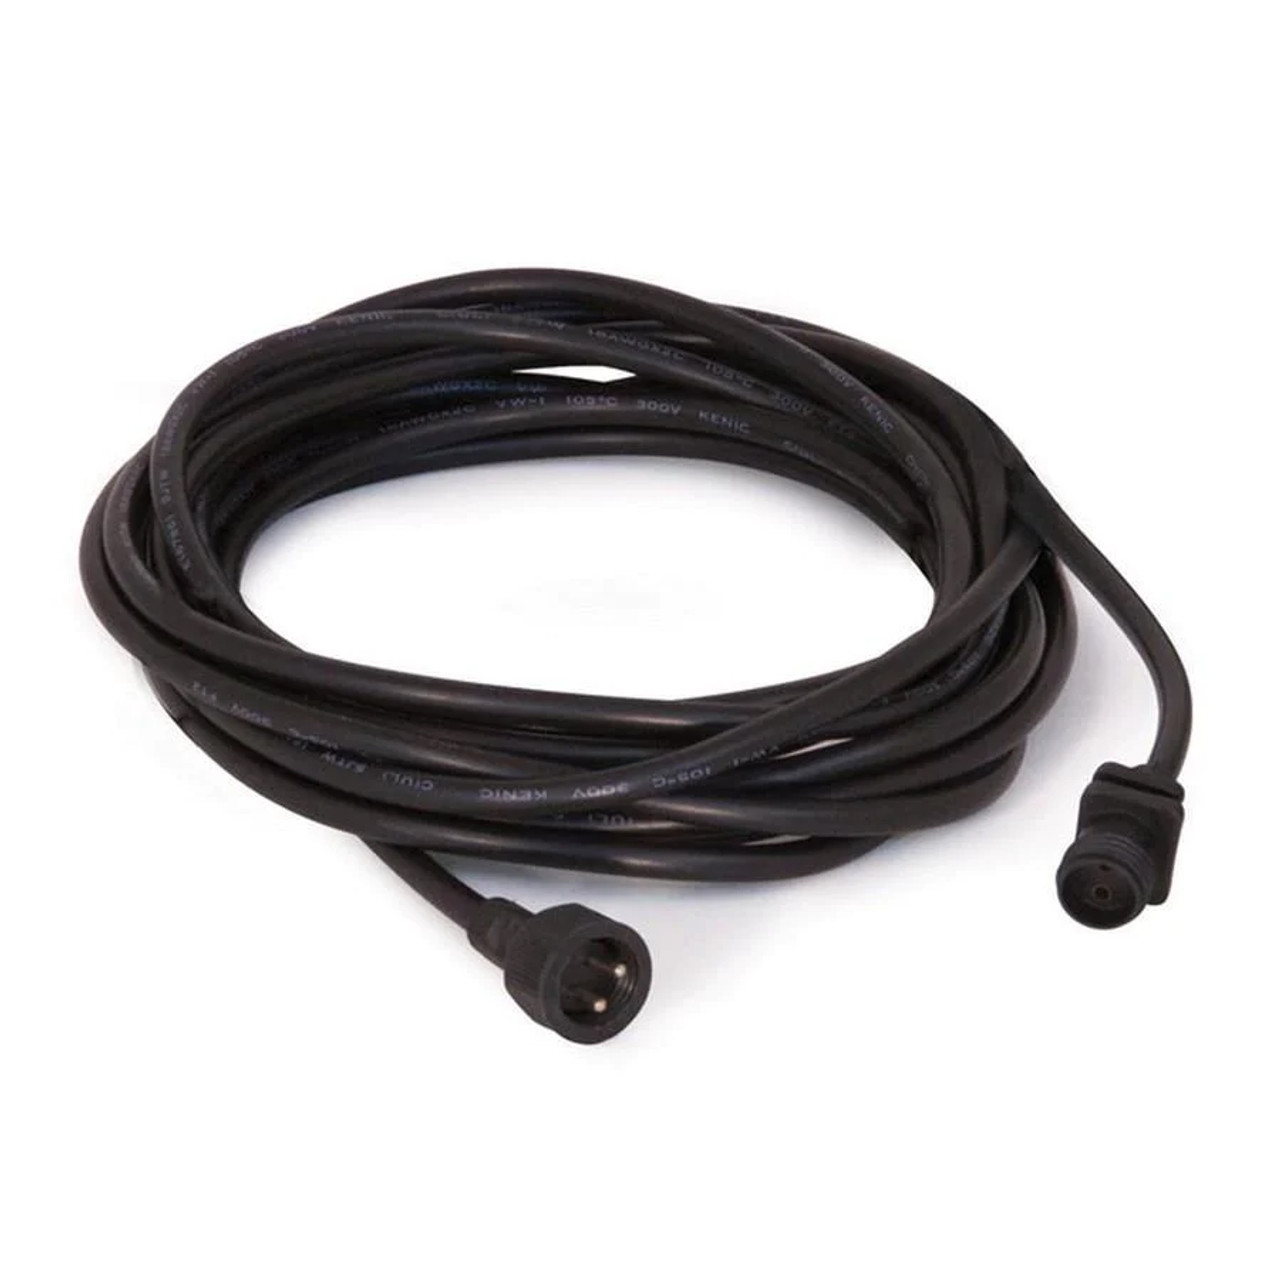 Atlantic 20' 2-wire Extension Cord for SOLW Lighting